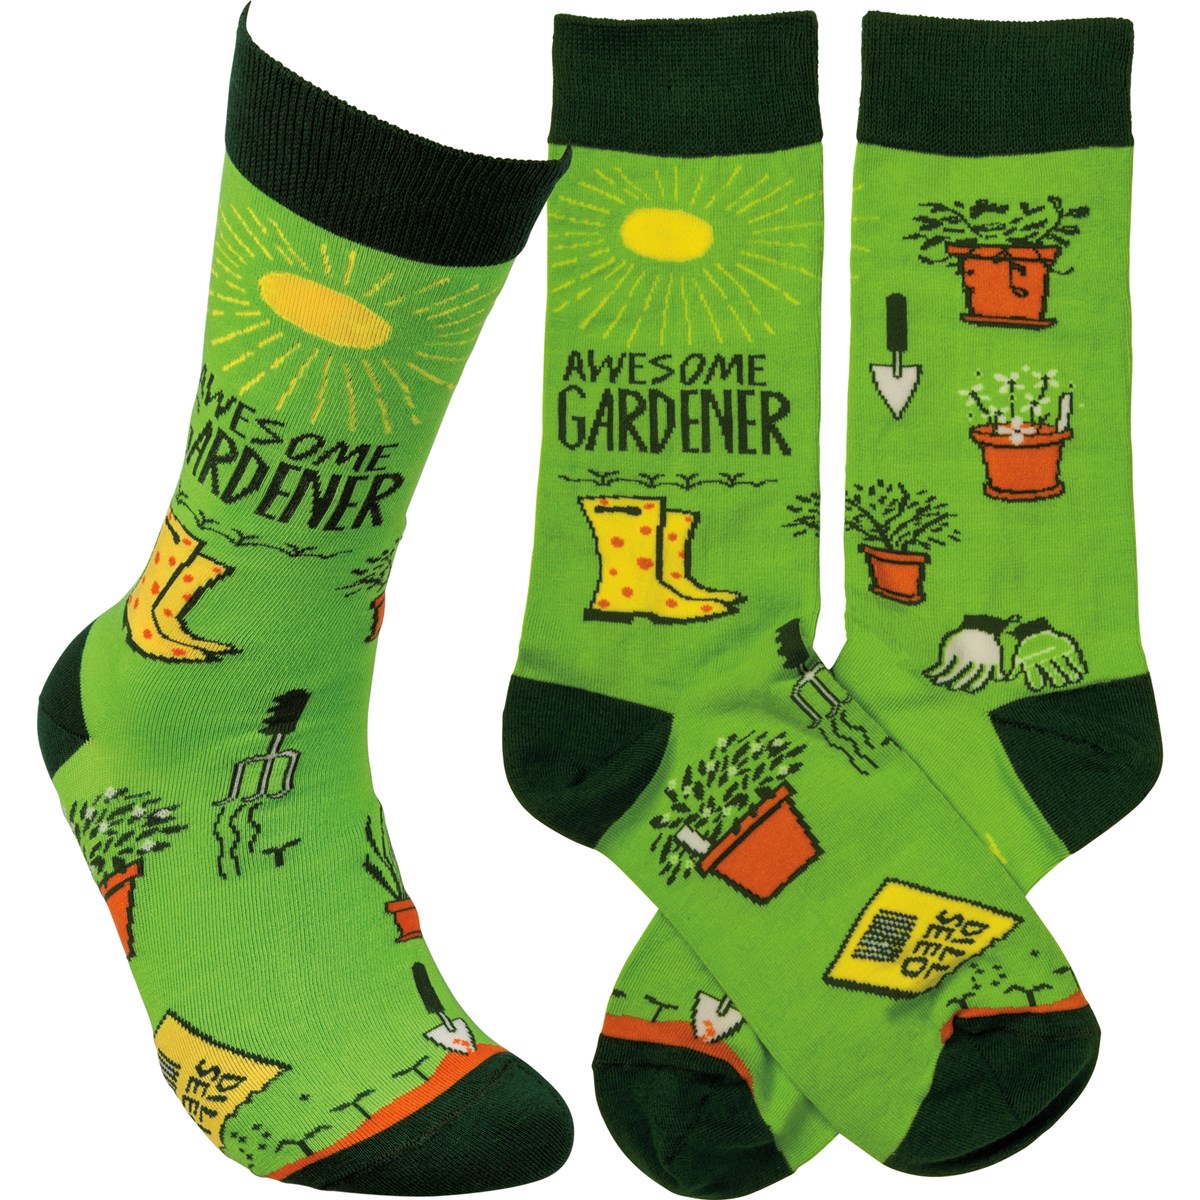 Socks - Awesome Gardener - One Size Fits Most - Cotton, Nylon, Spandex